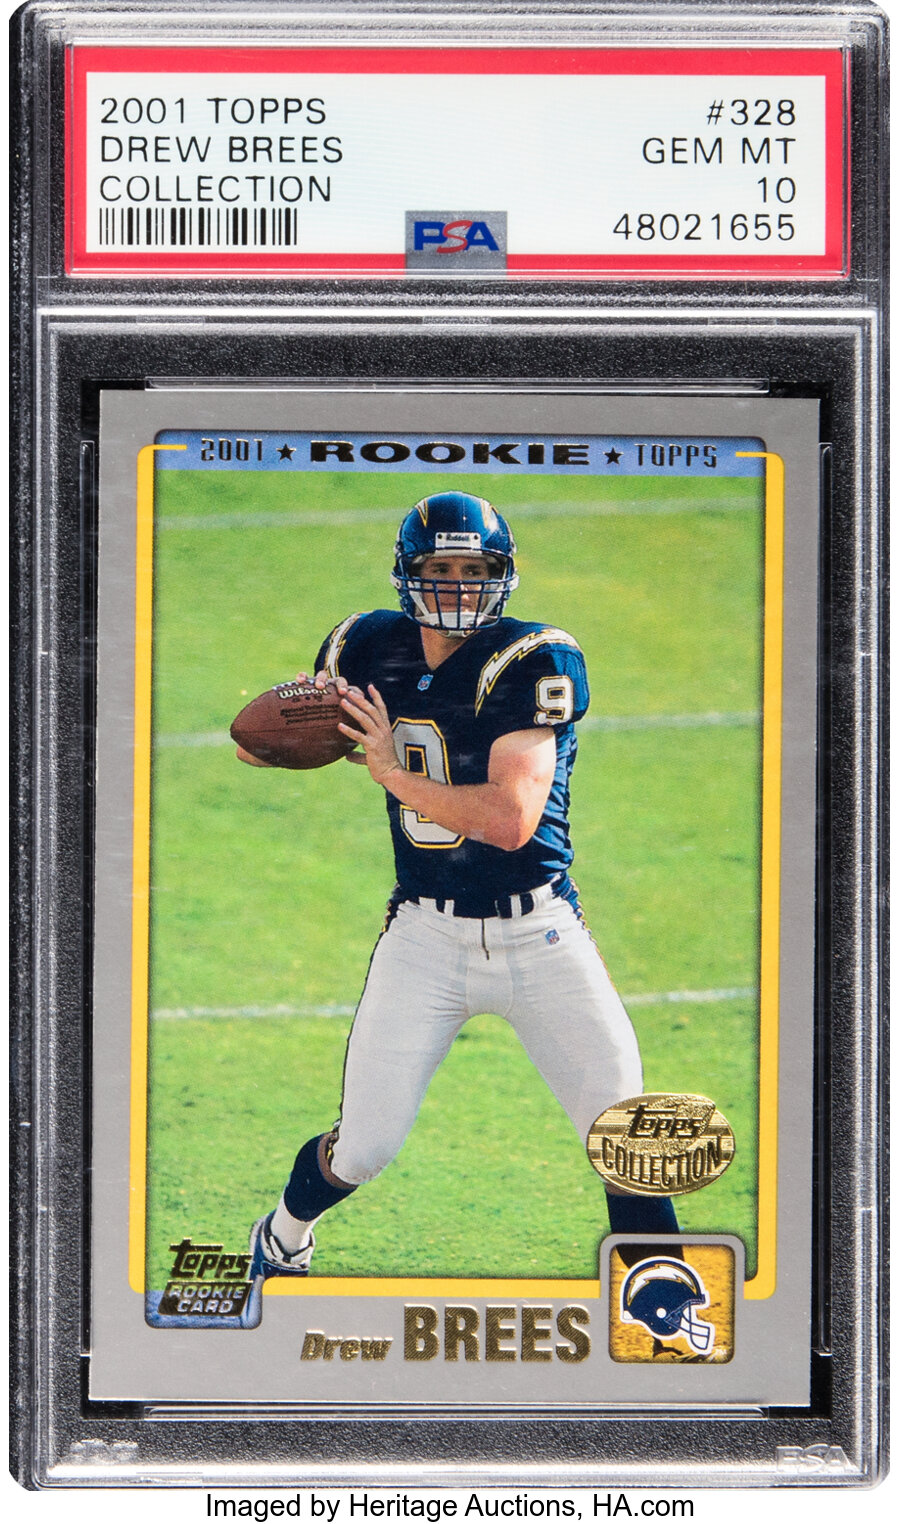 2001 Topps Collection Drew Brees Rookie #328 PSA Gem Mint 10